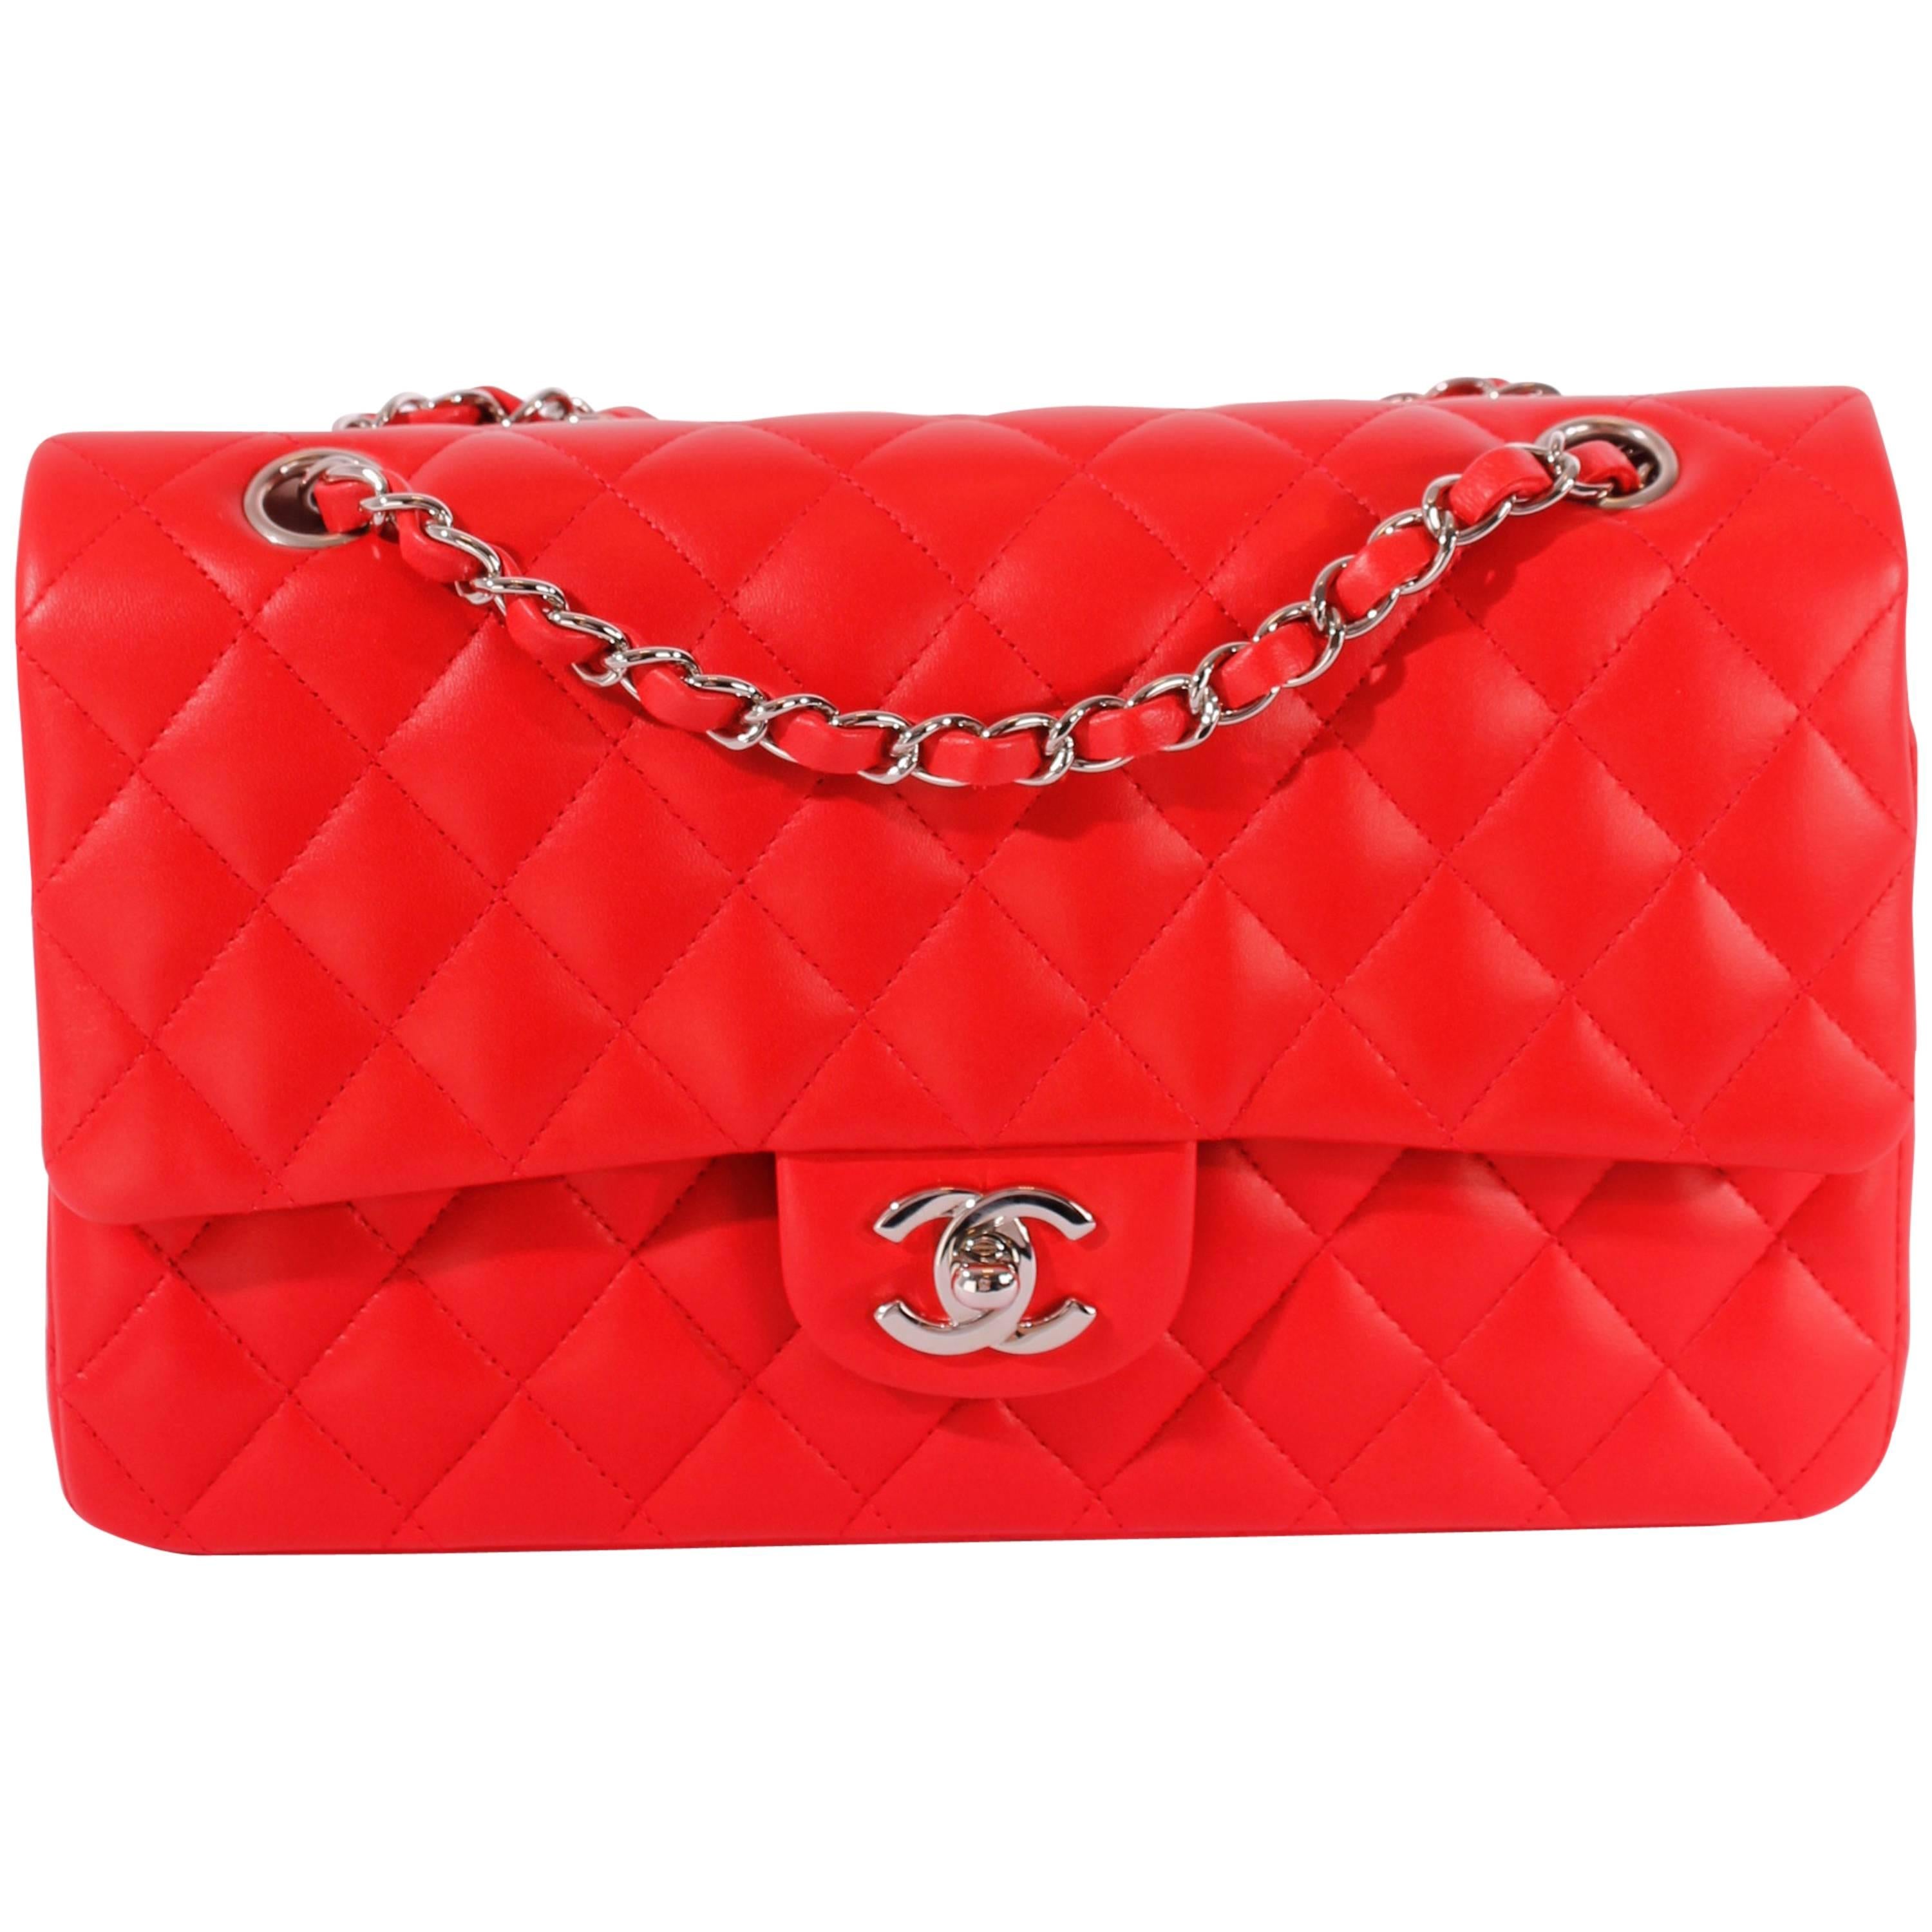 2005 Chanel 2.55 Medium Classic Double Flap Bag - red/silver